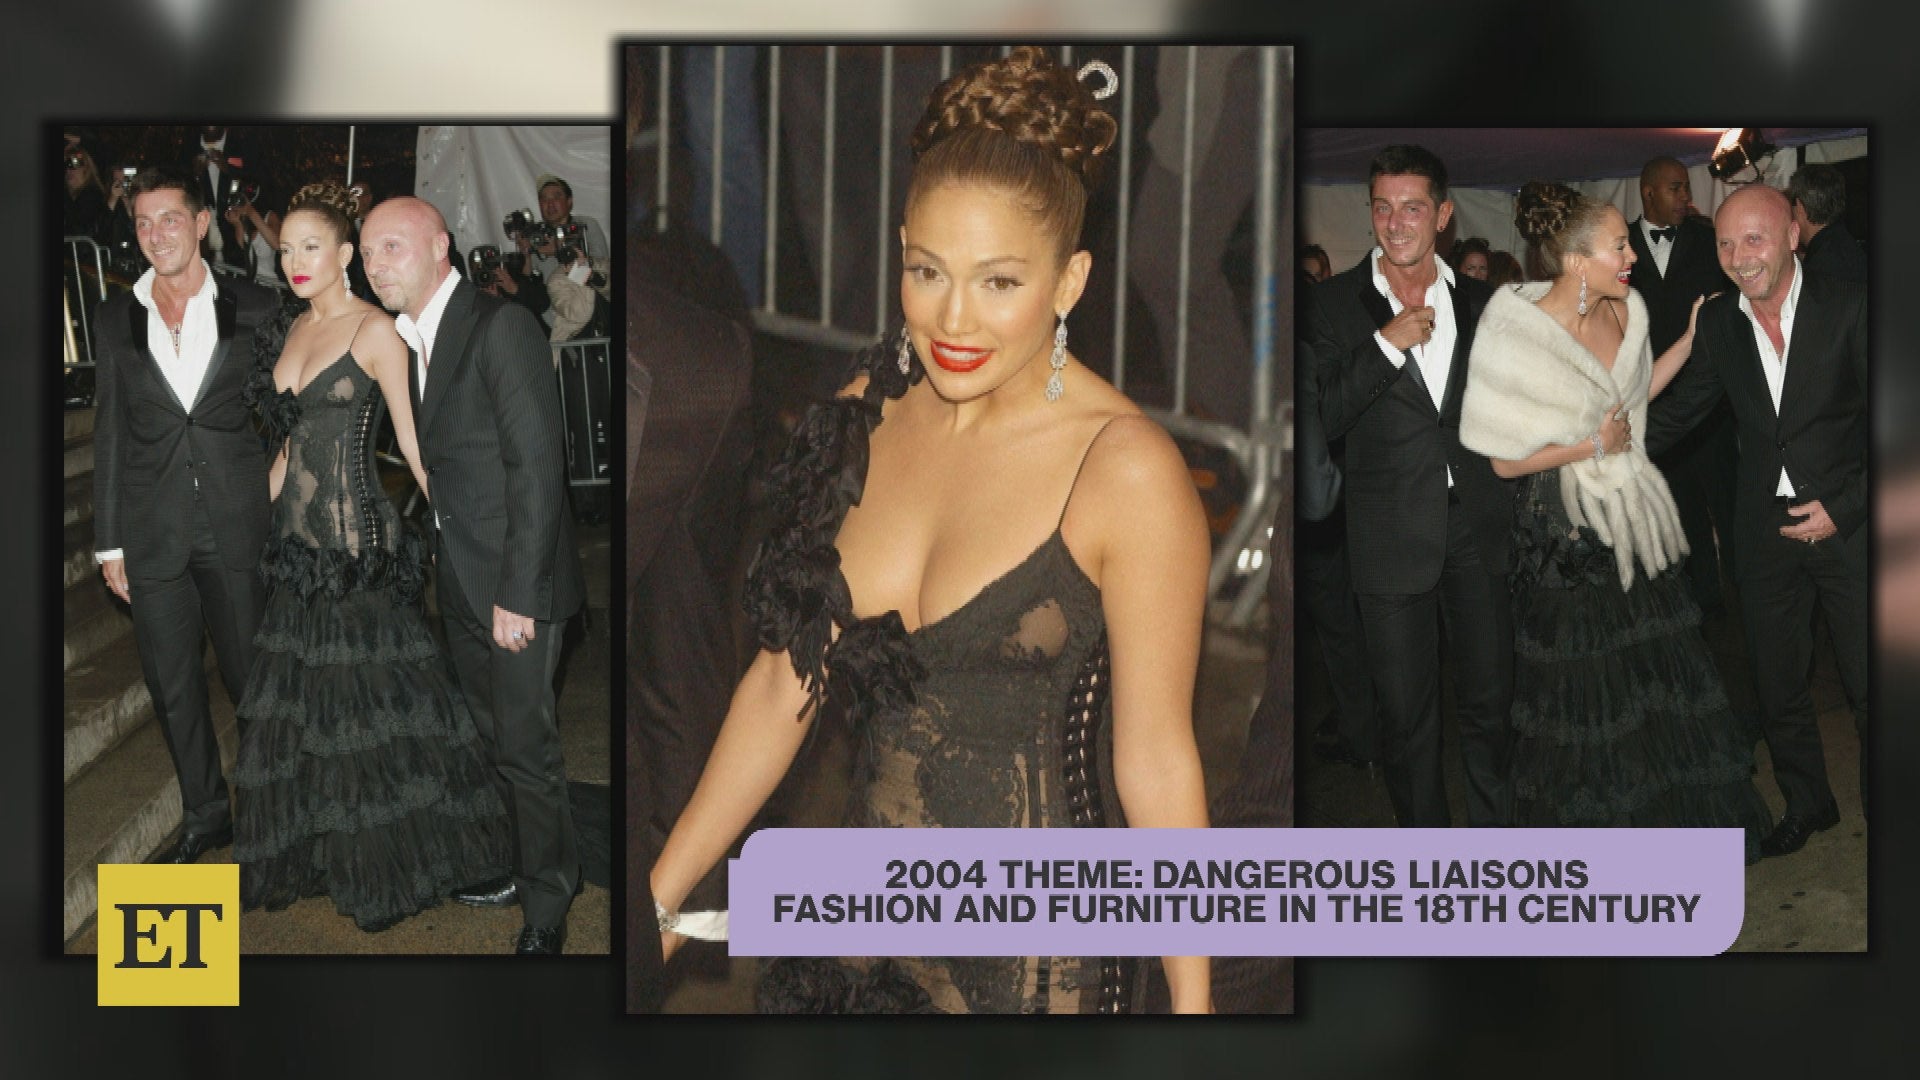 Jennifer Lopez at the Met Gala: See Her Style Evolution